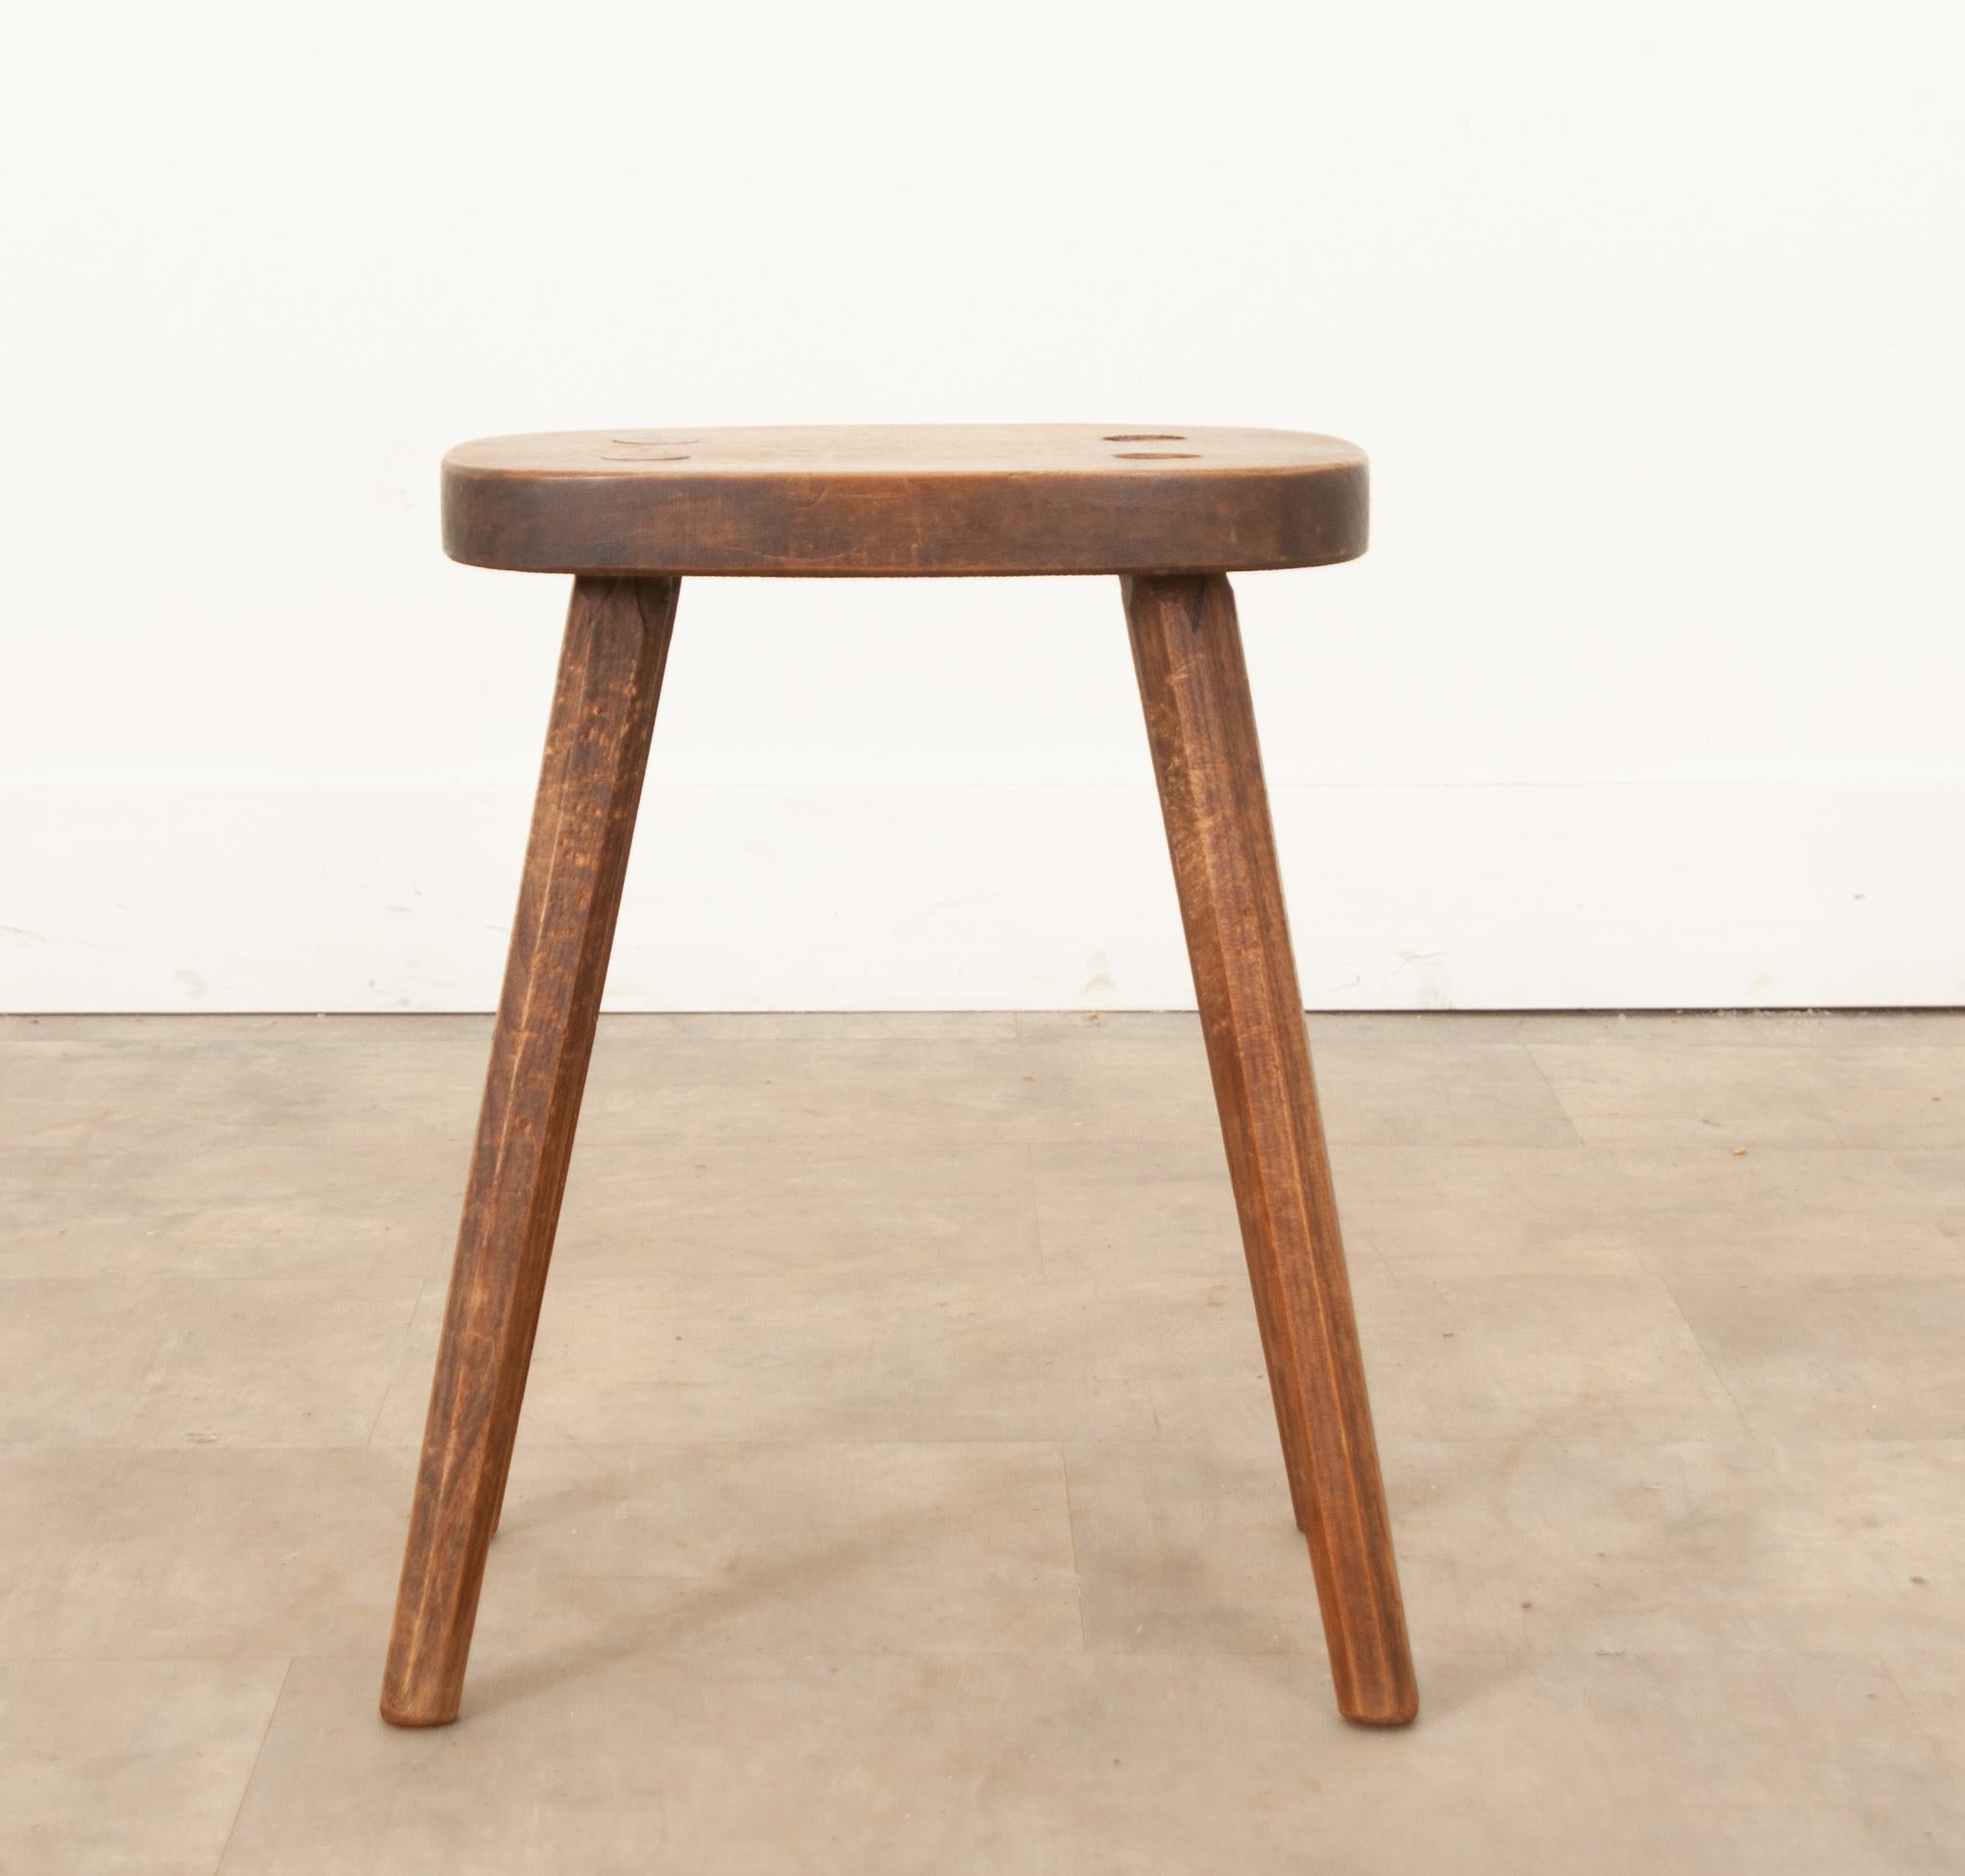 Rustic French 19th Century Milking Stool